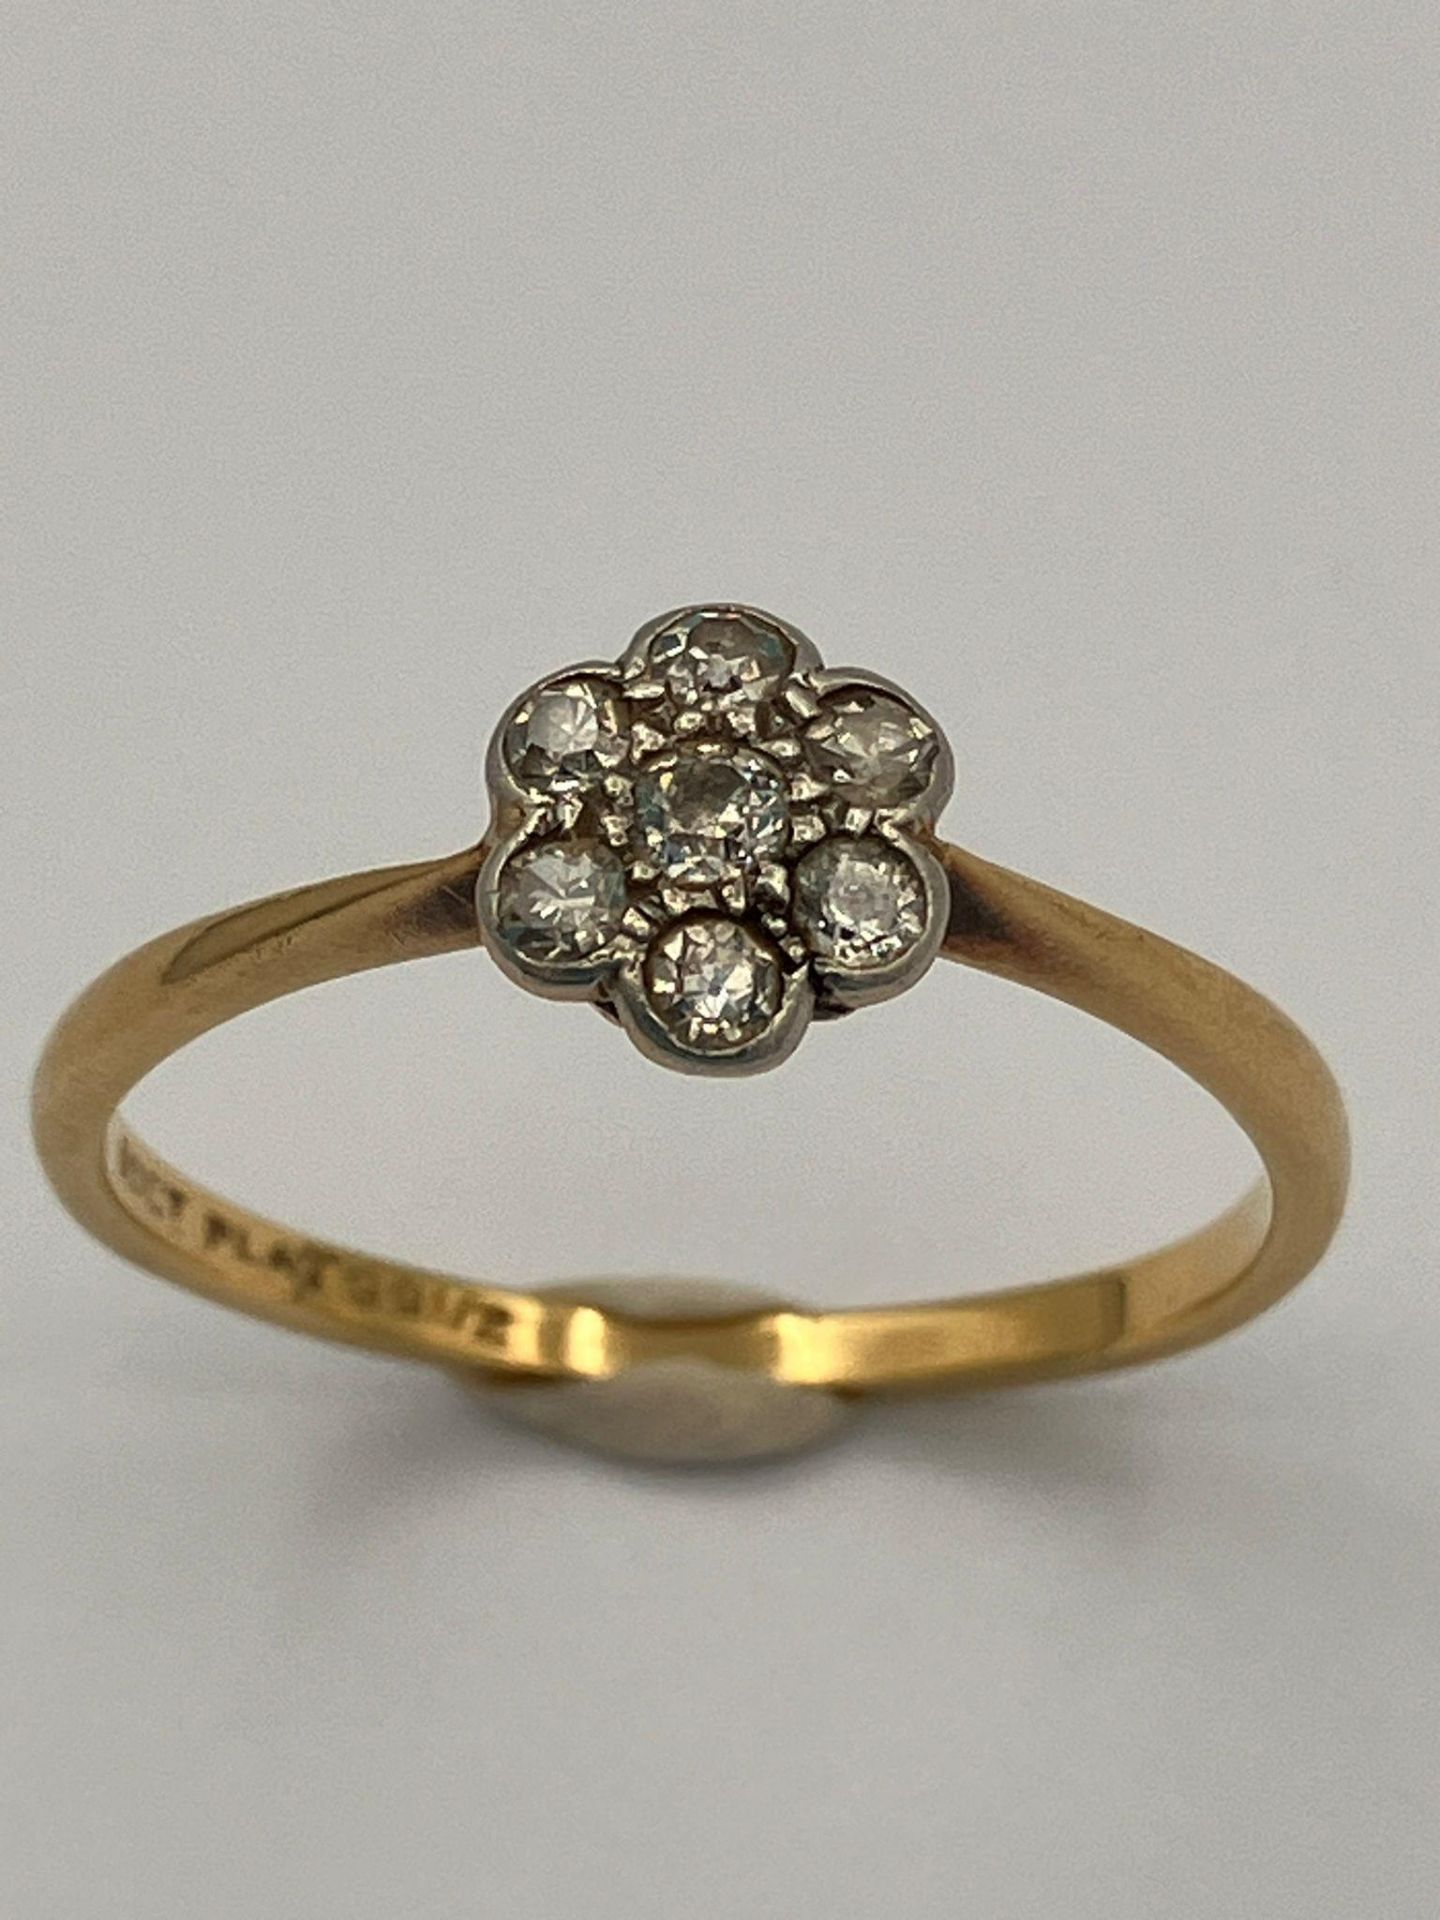 Vintage 18 carat GOLD RING with PLATINUM set DIAMONDS mounted in floral formation. 1.9 grams. Size P